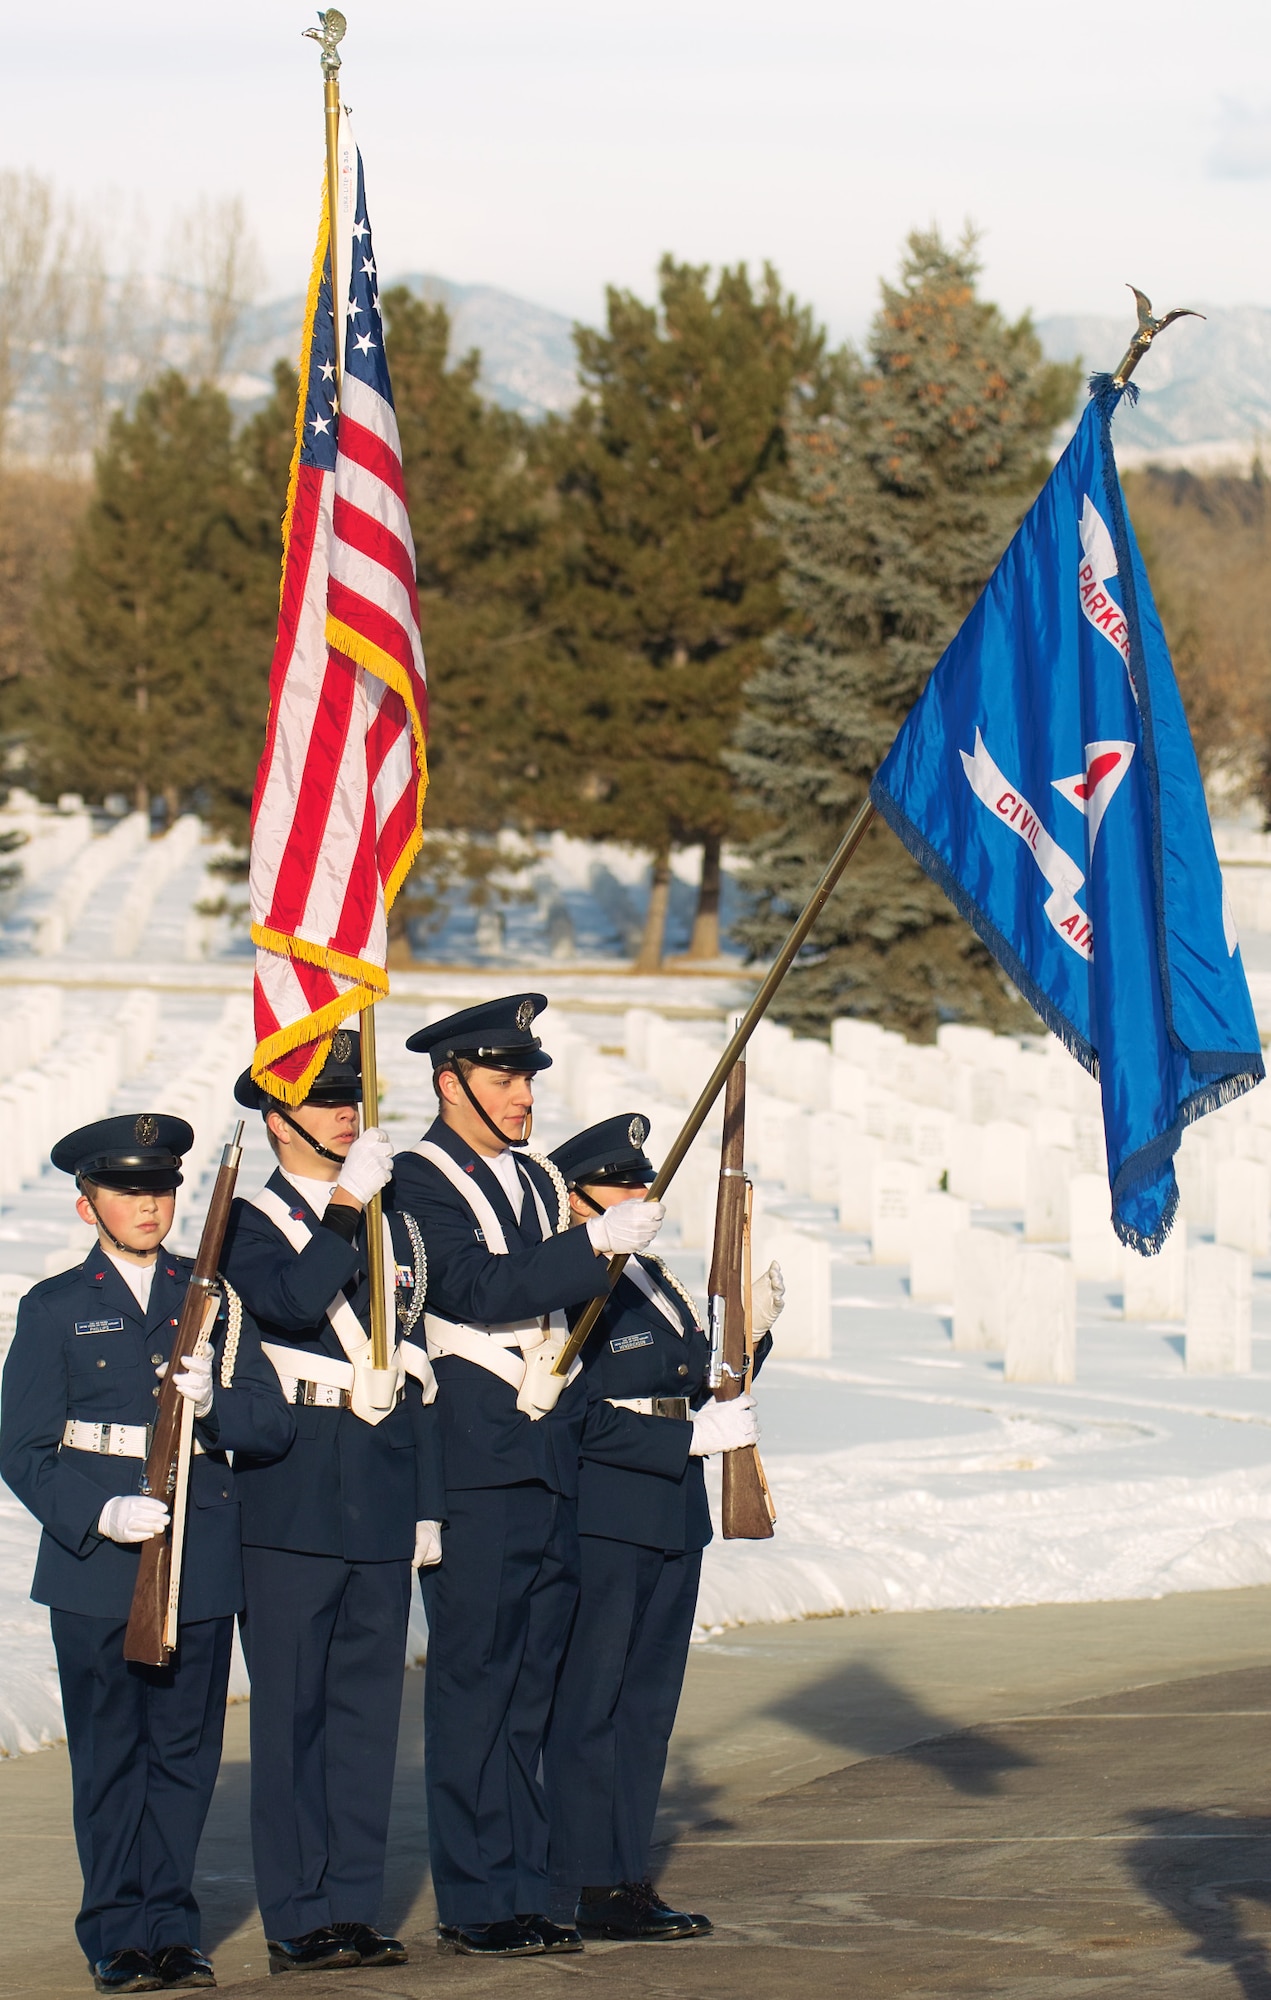 A Civil Air Patrol color guard presents arms during the national anthem at Wreaths Across America. (U.S. Air Force photo by Master Sgt. Steven clark)